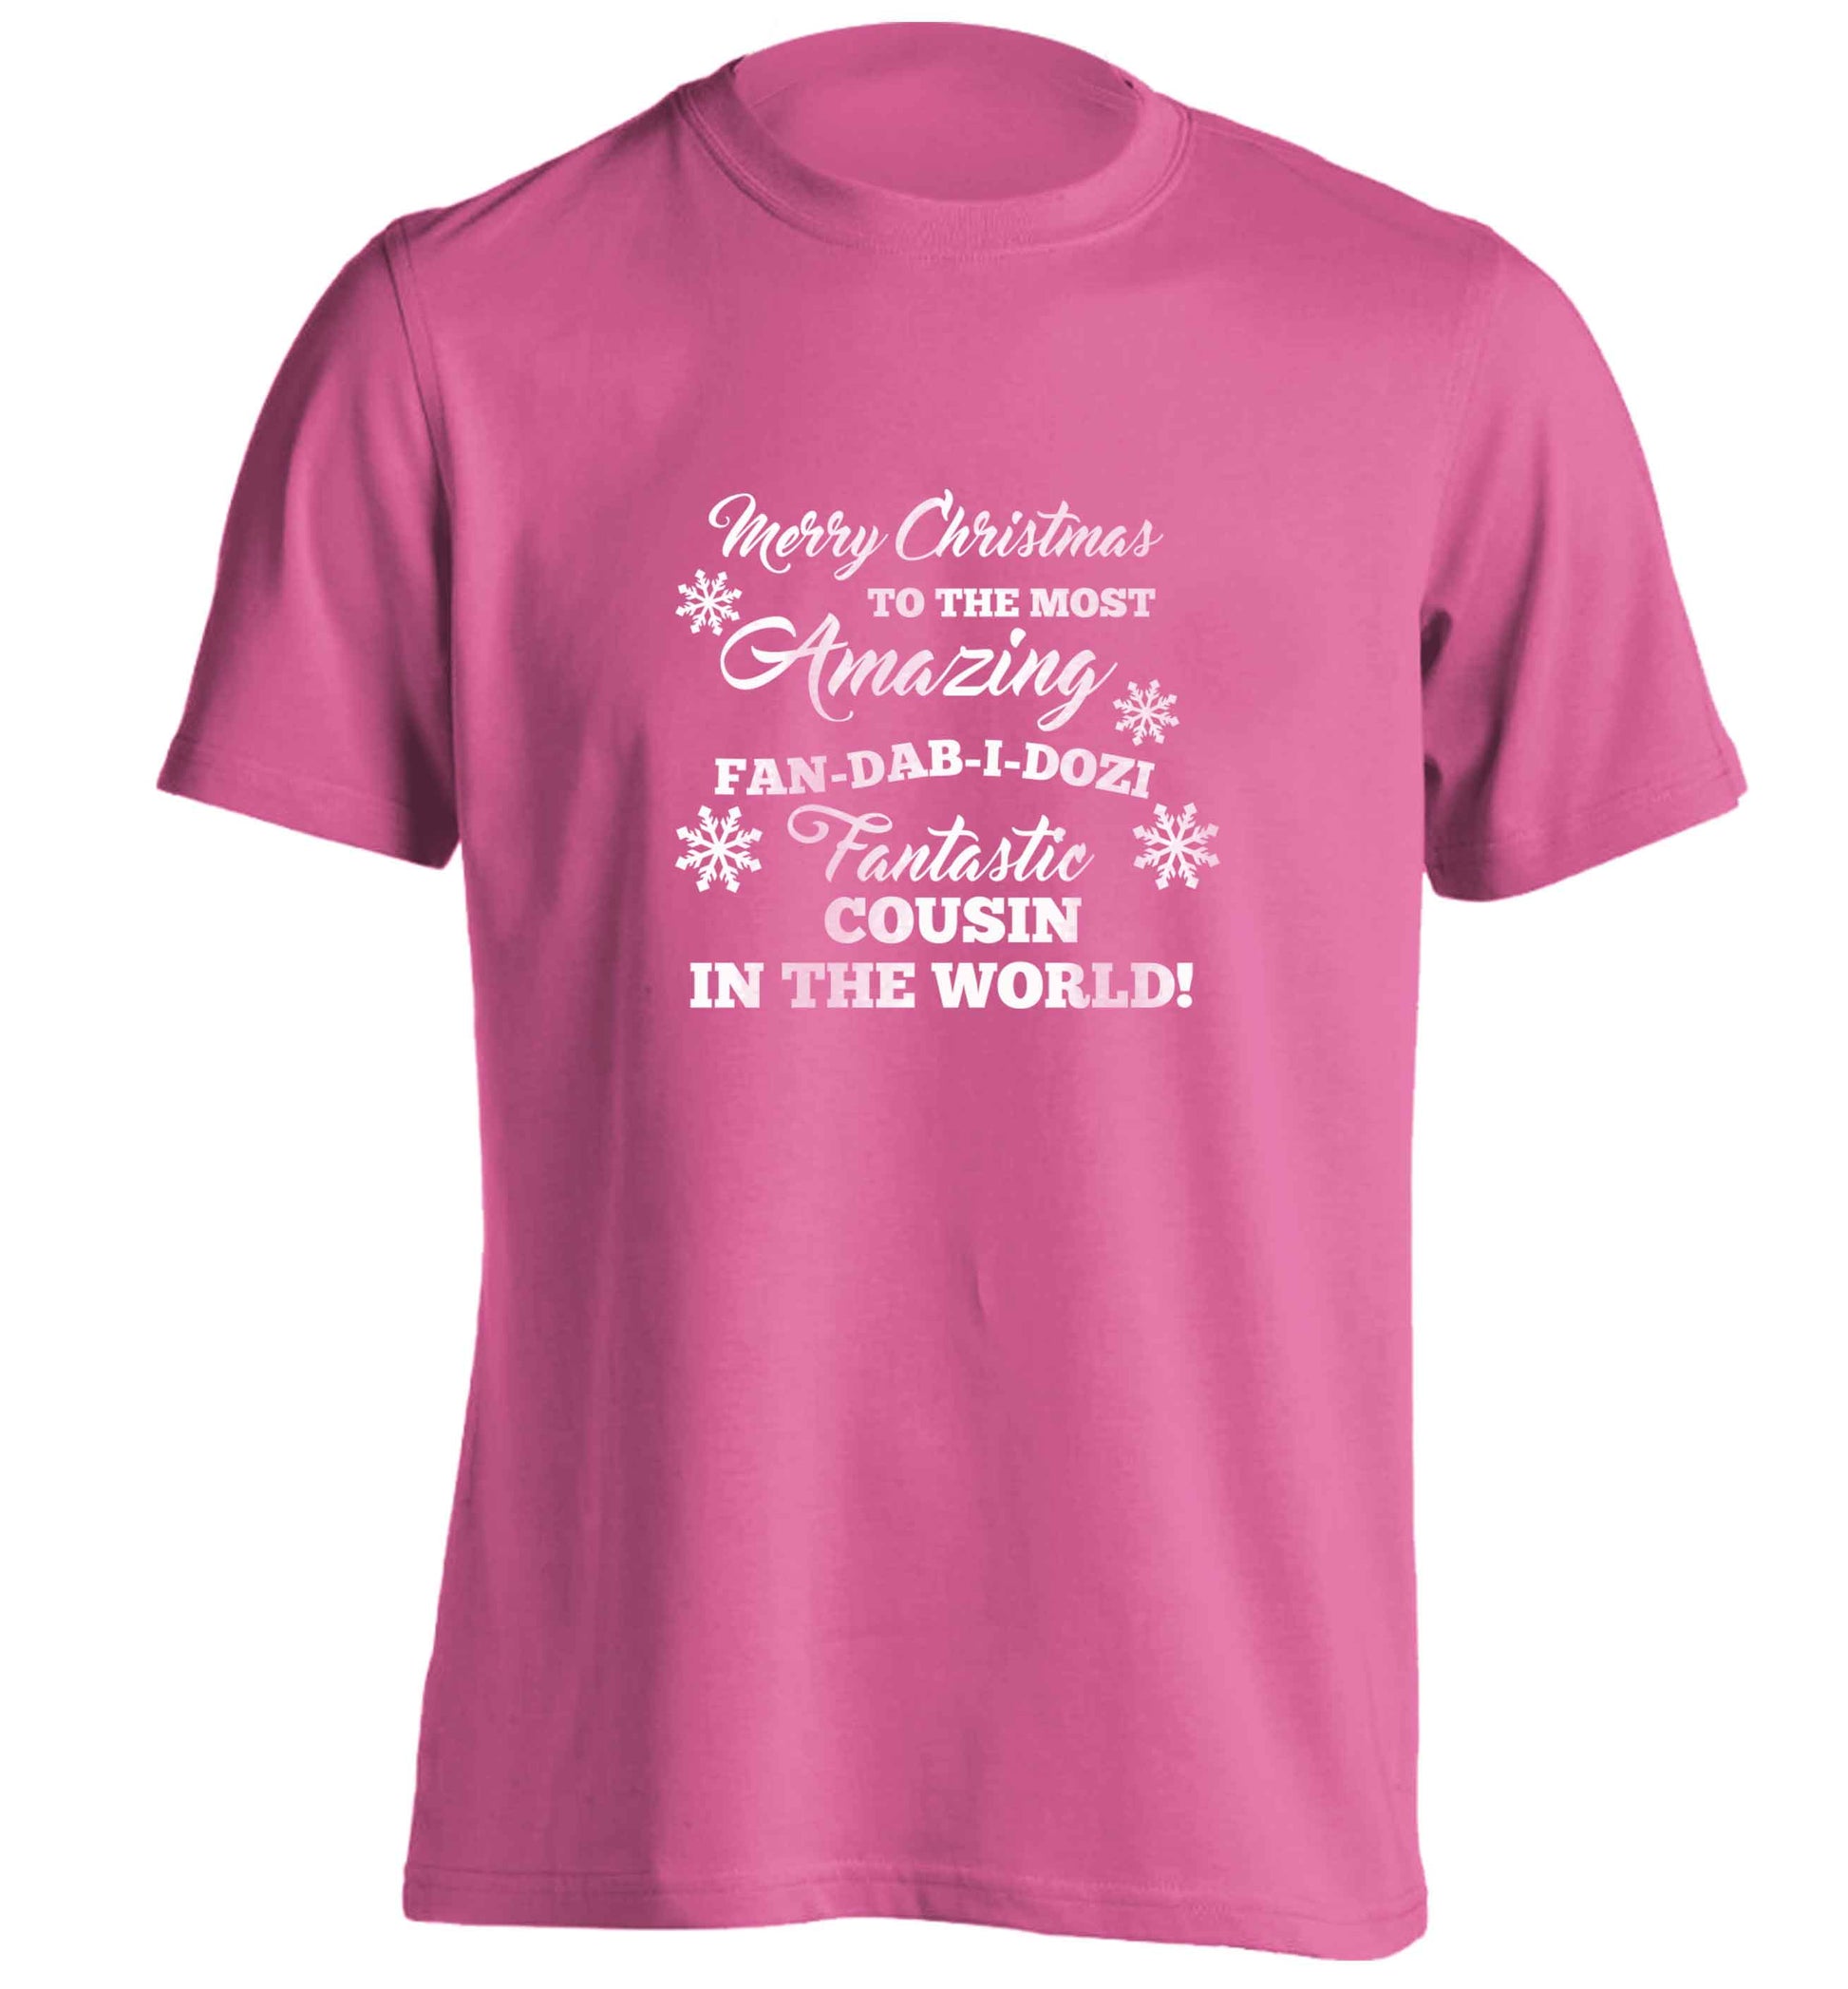 Merry Christmas to the most amazing fan-dab-i-dozi fantasic Cousin in the world adults unisex pink Tshirt 2XL